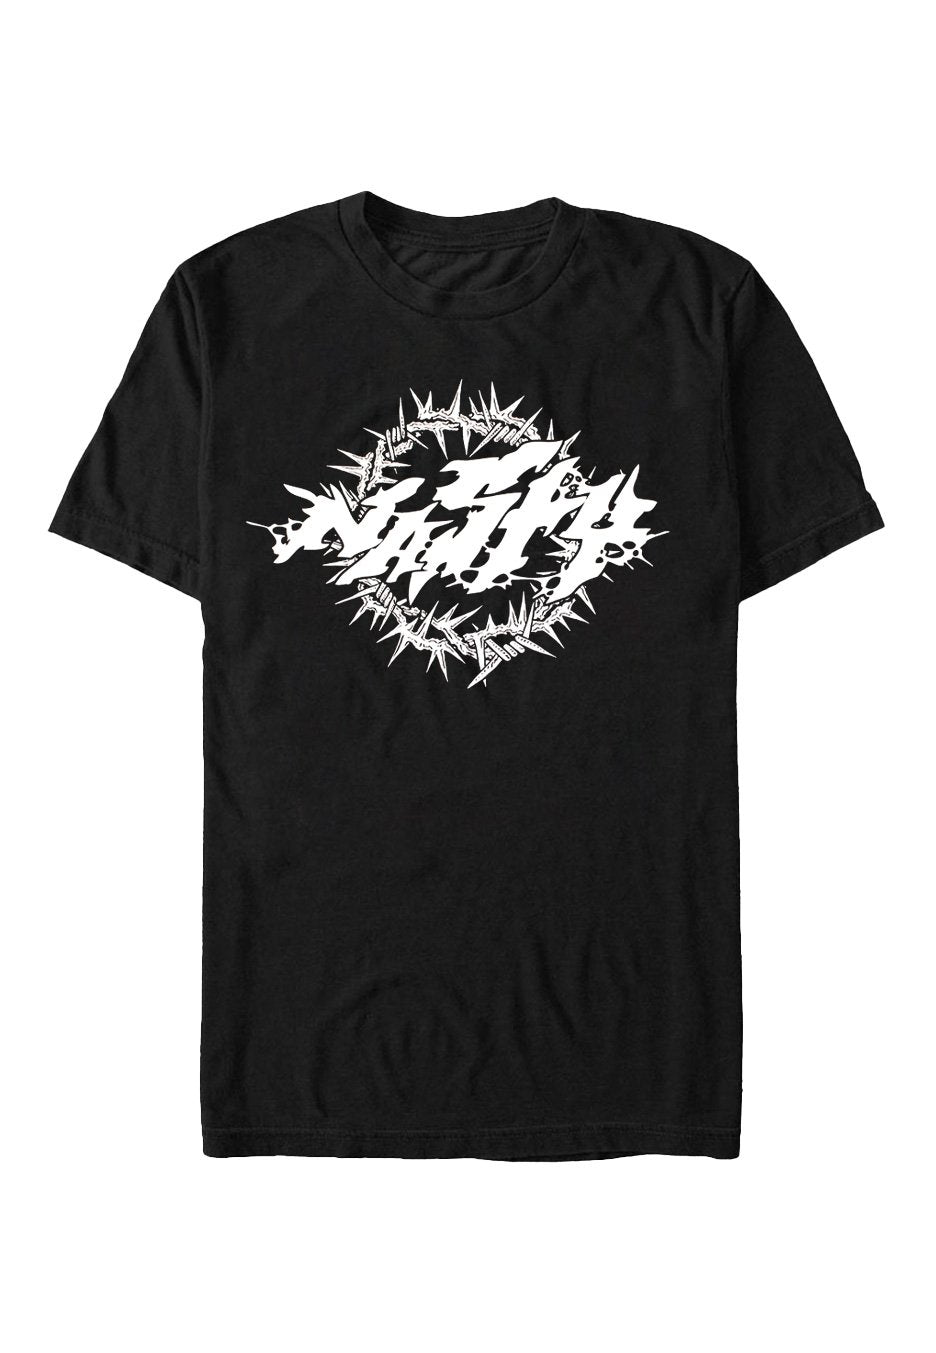 Nasty - Crown Of Thorns - T-Shirt